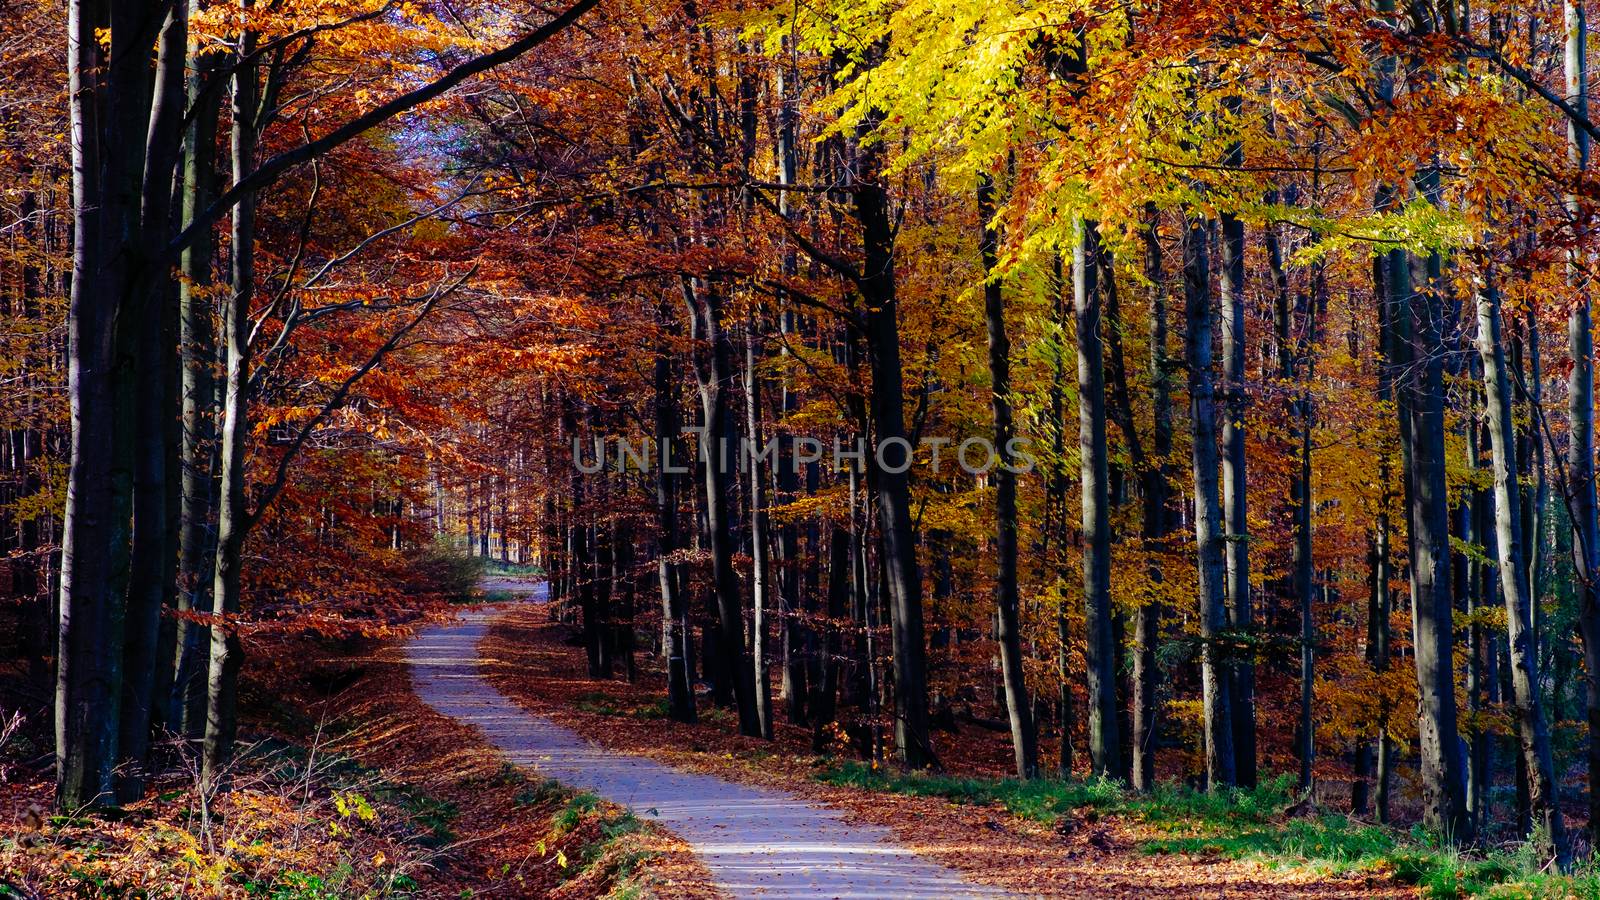 Landscape view of autumn forest colorful foliage, trees and road